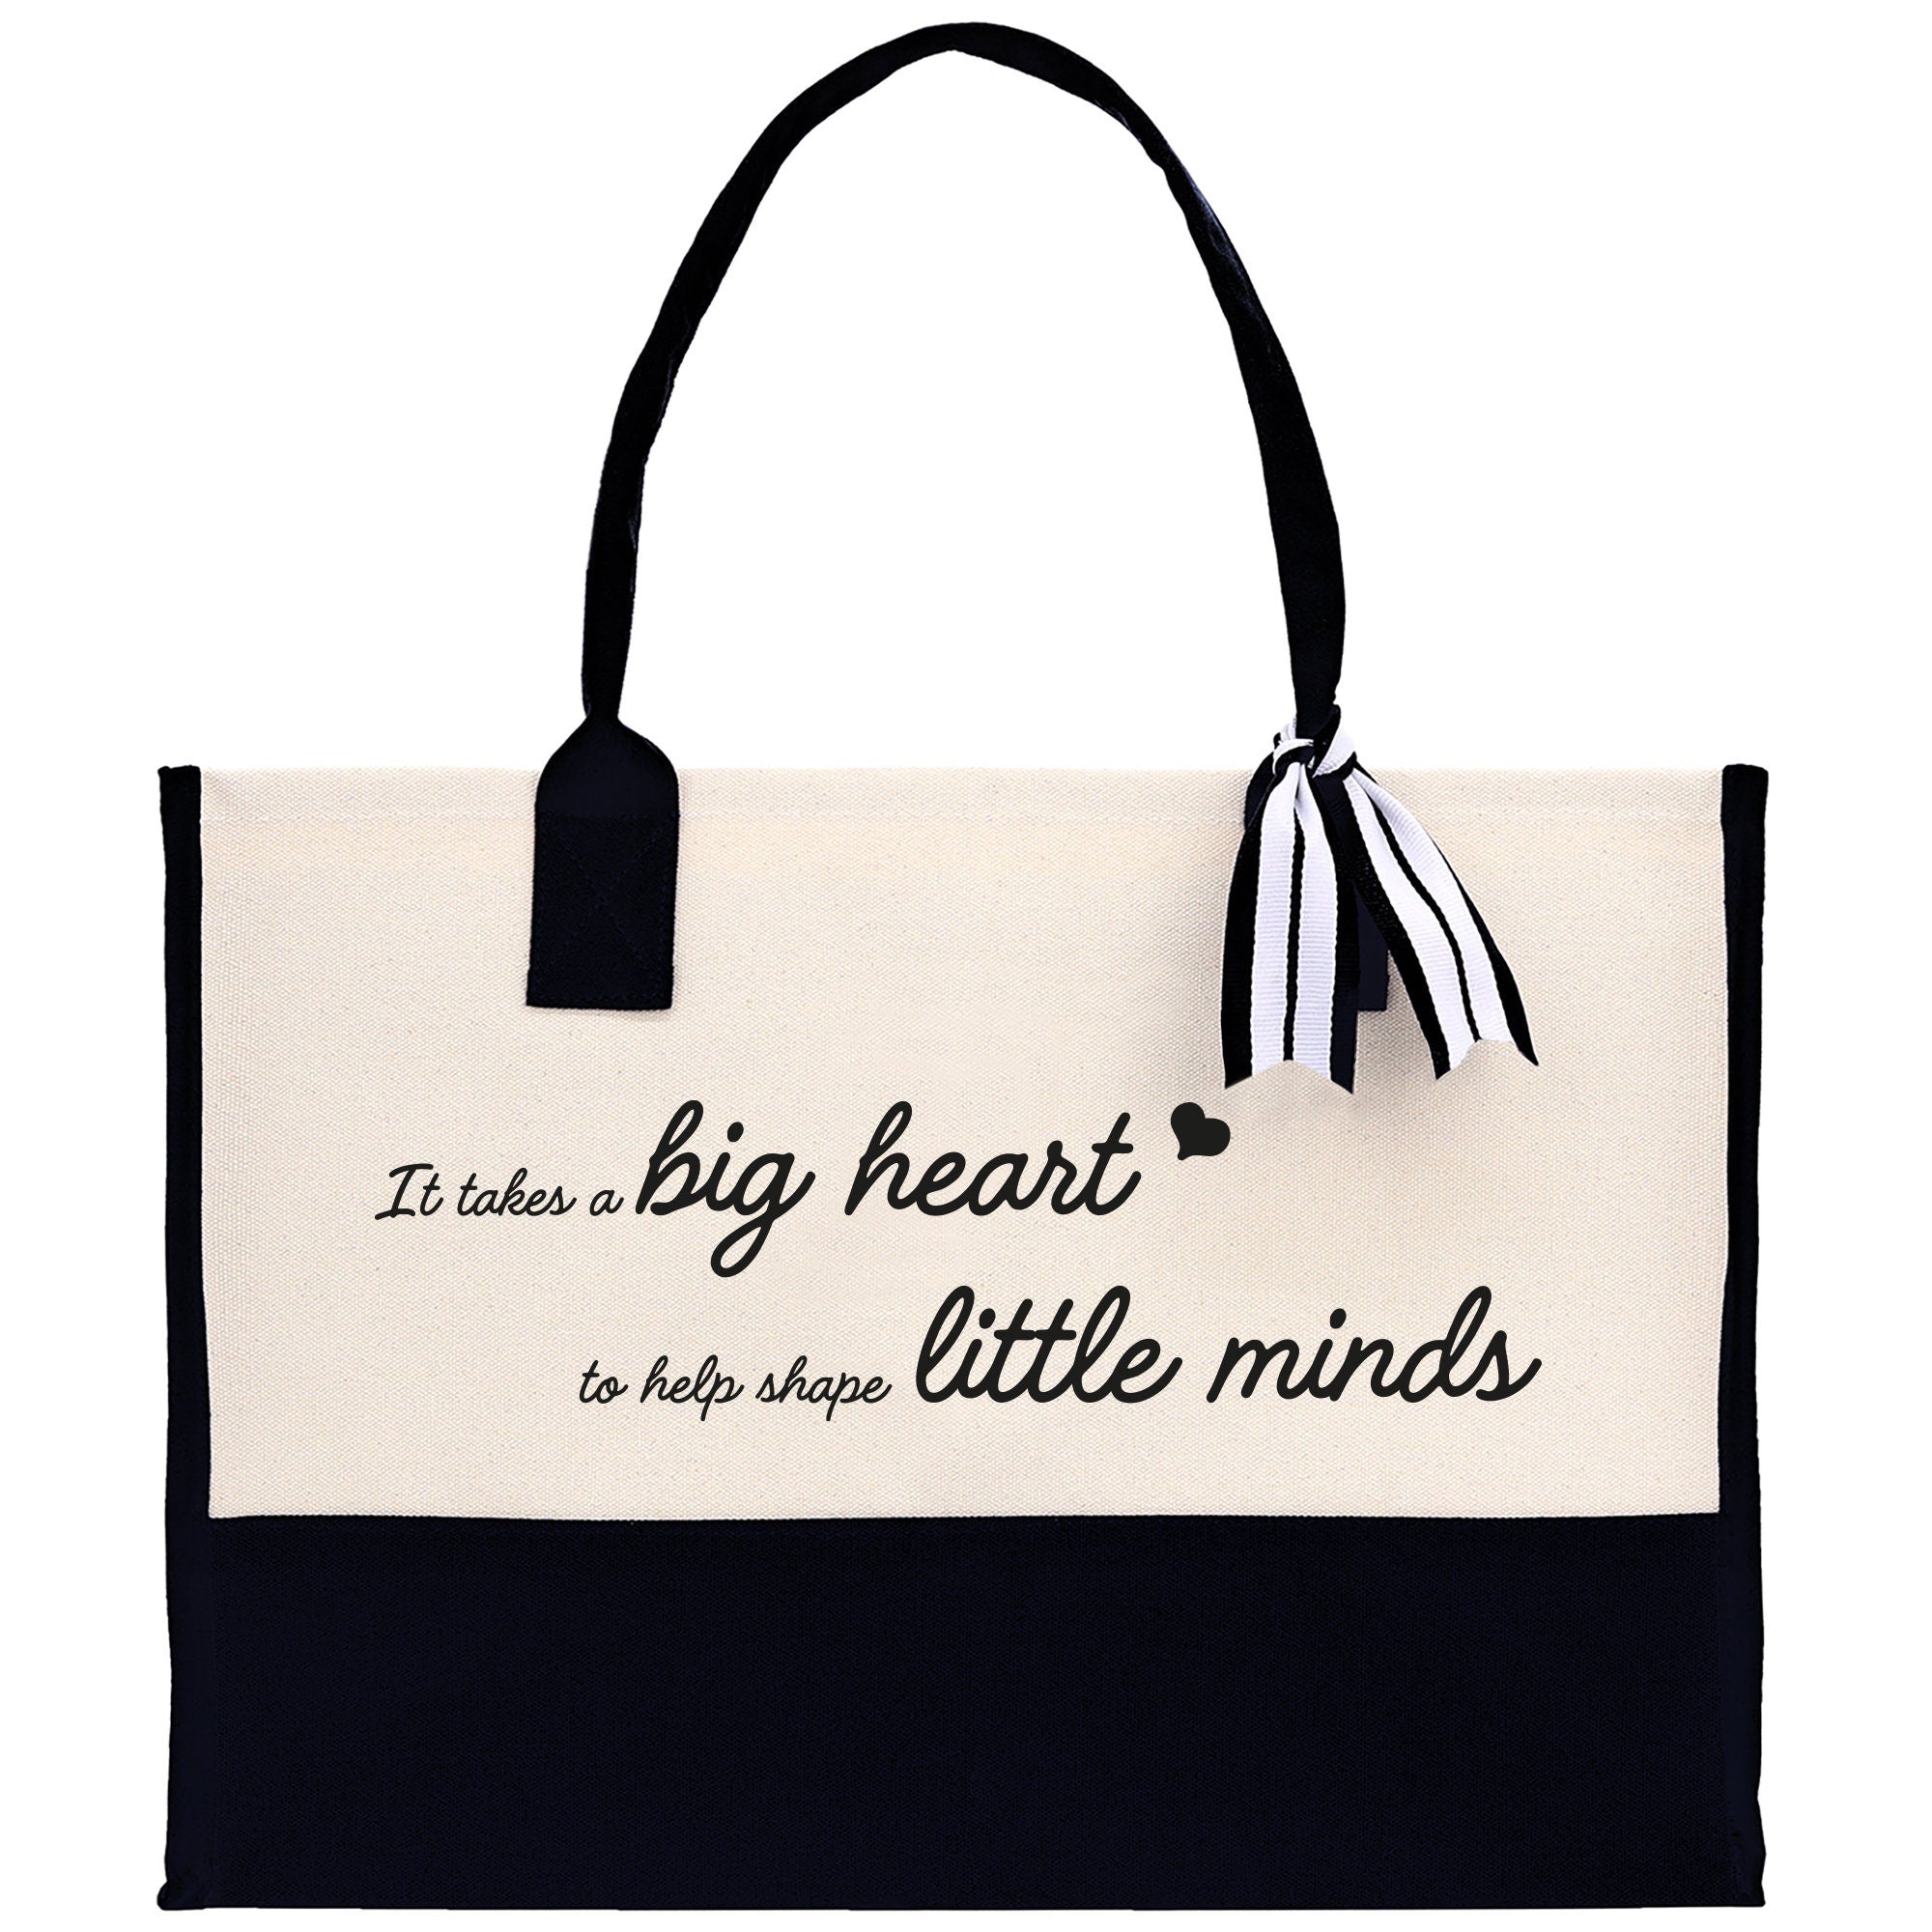 It Takes a Big Heart to Help Shape Little Minds Canvas Tote Bag Birthday Gift for Her Weekender Tote Bag Beach Tote Bag Large Beach Tote Bag